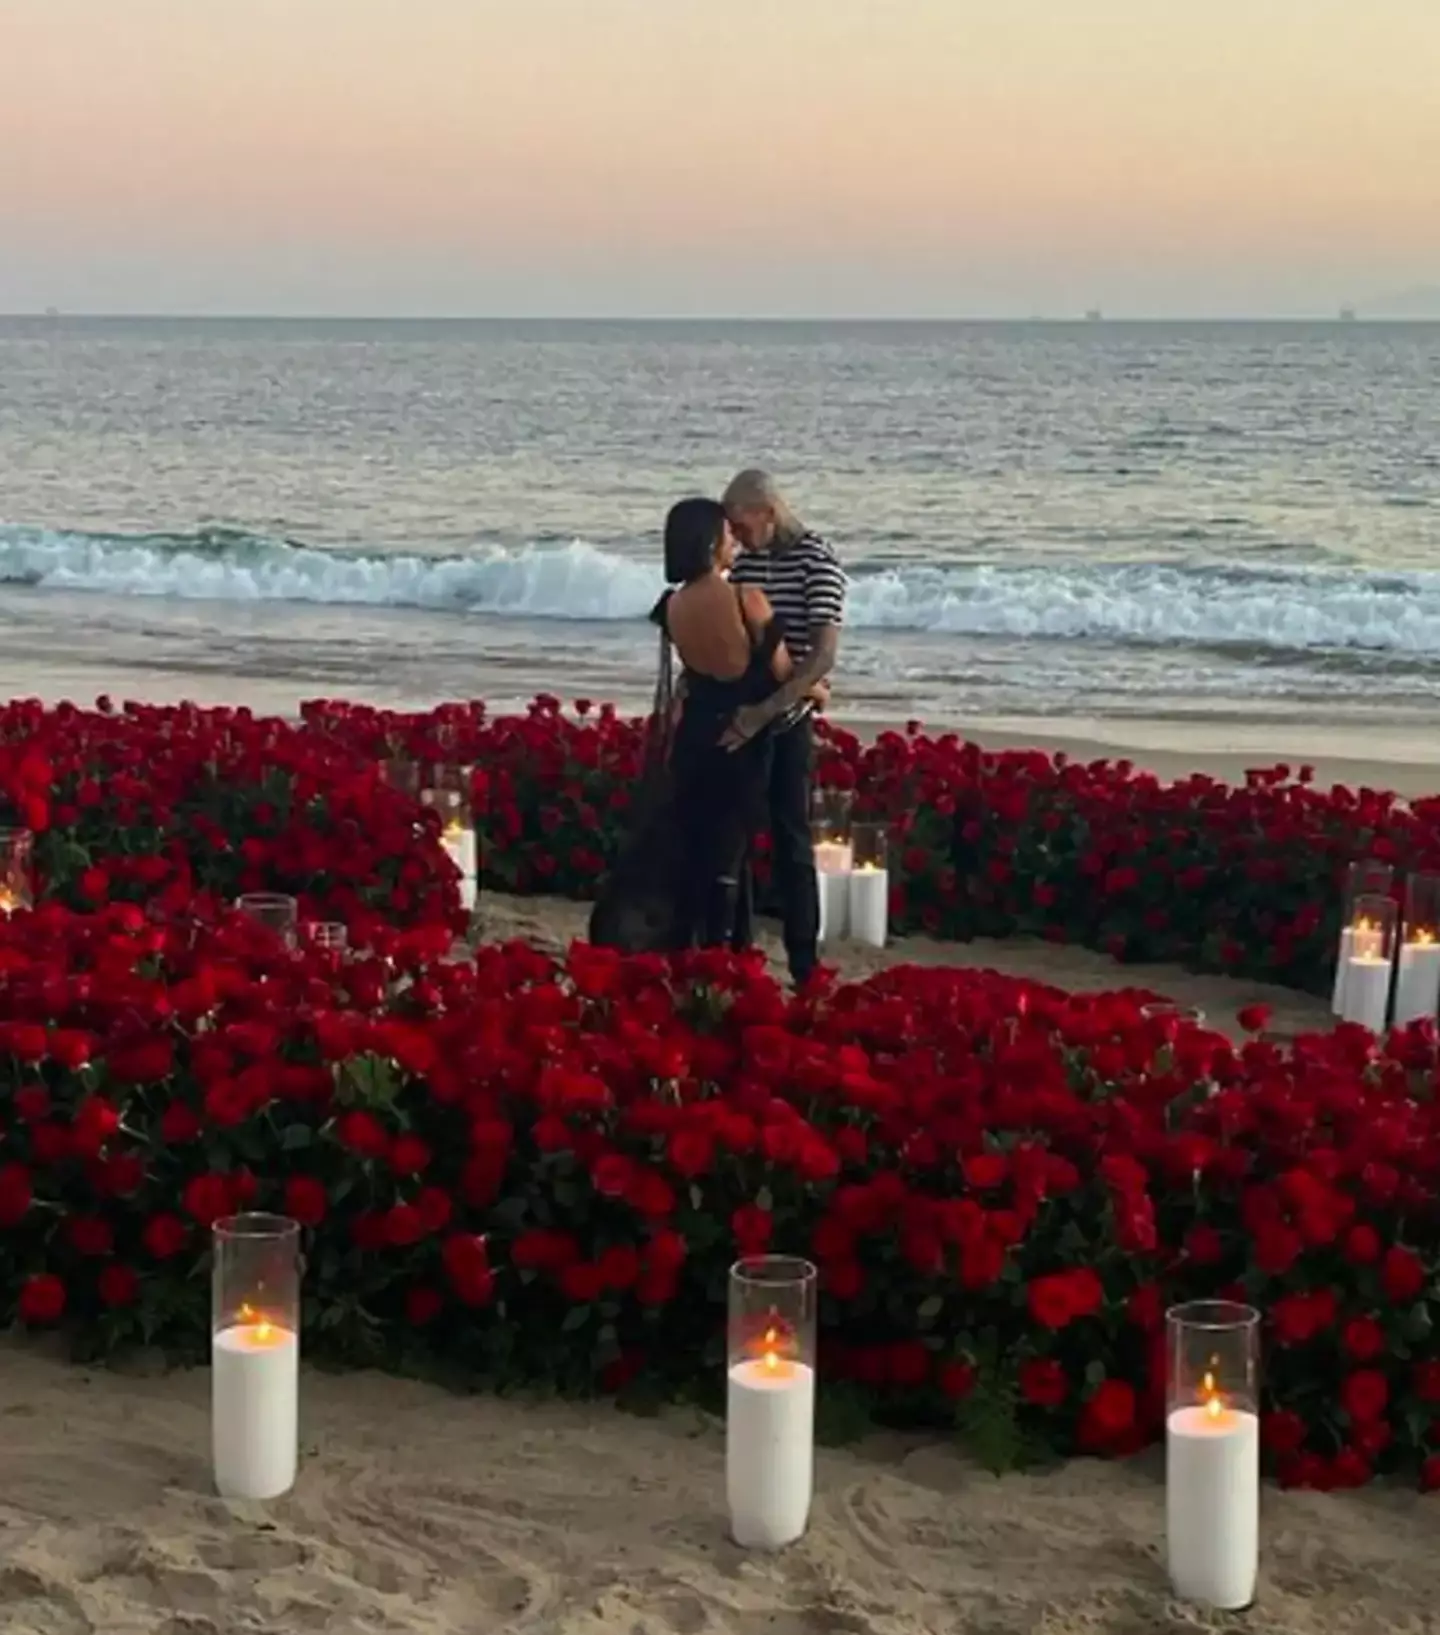 Kourtney and Travis's engagement was shown on the show.